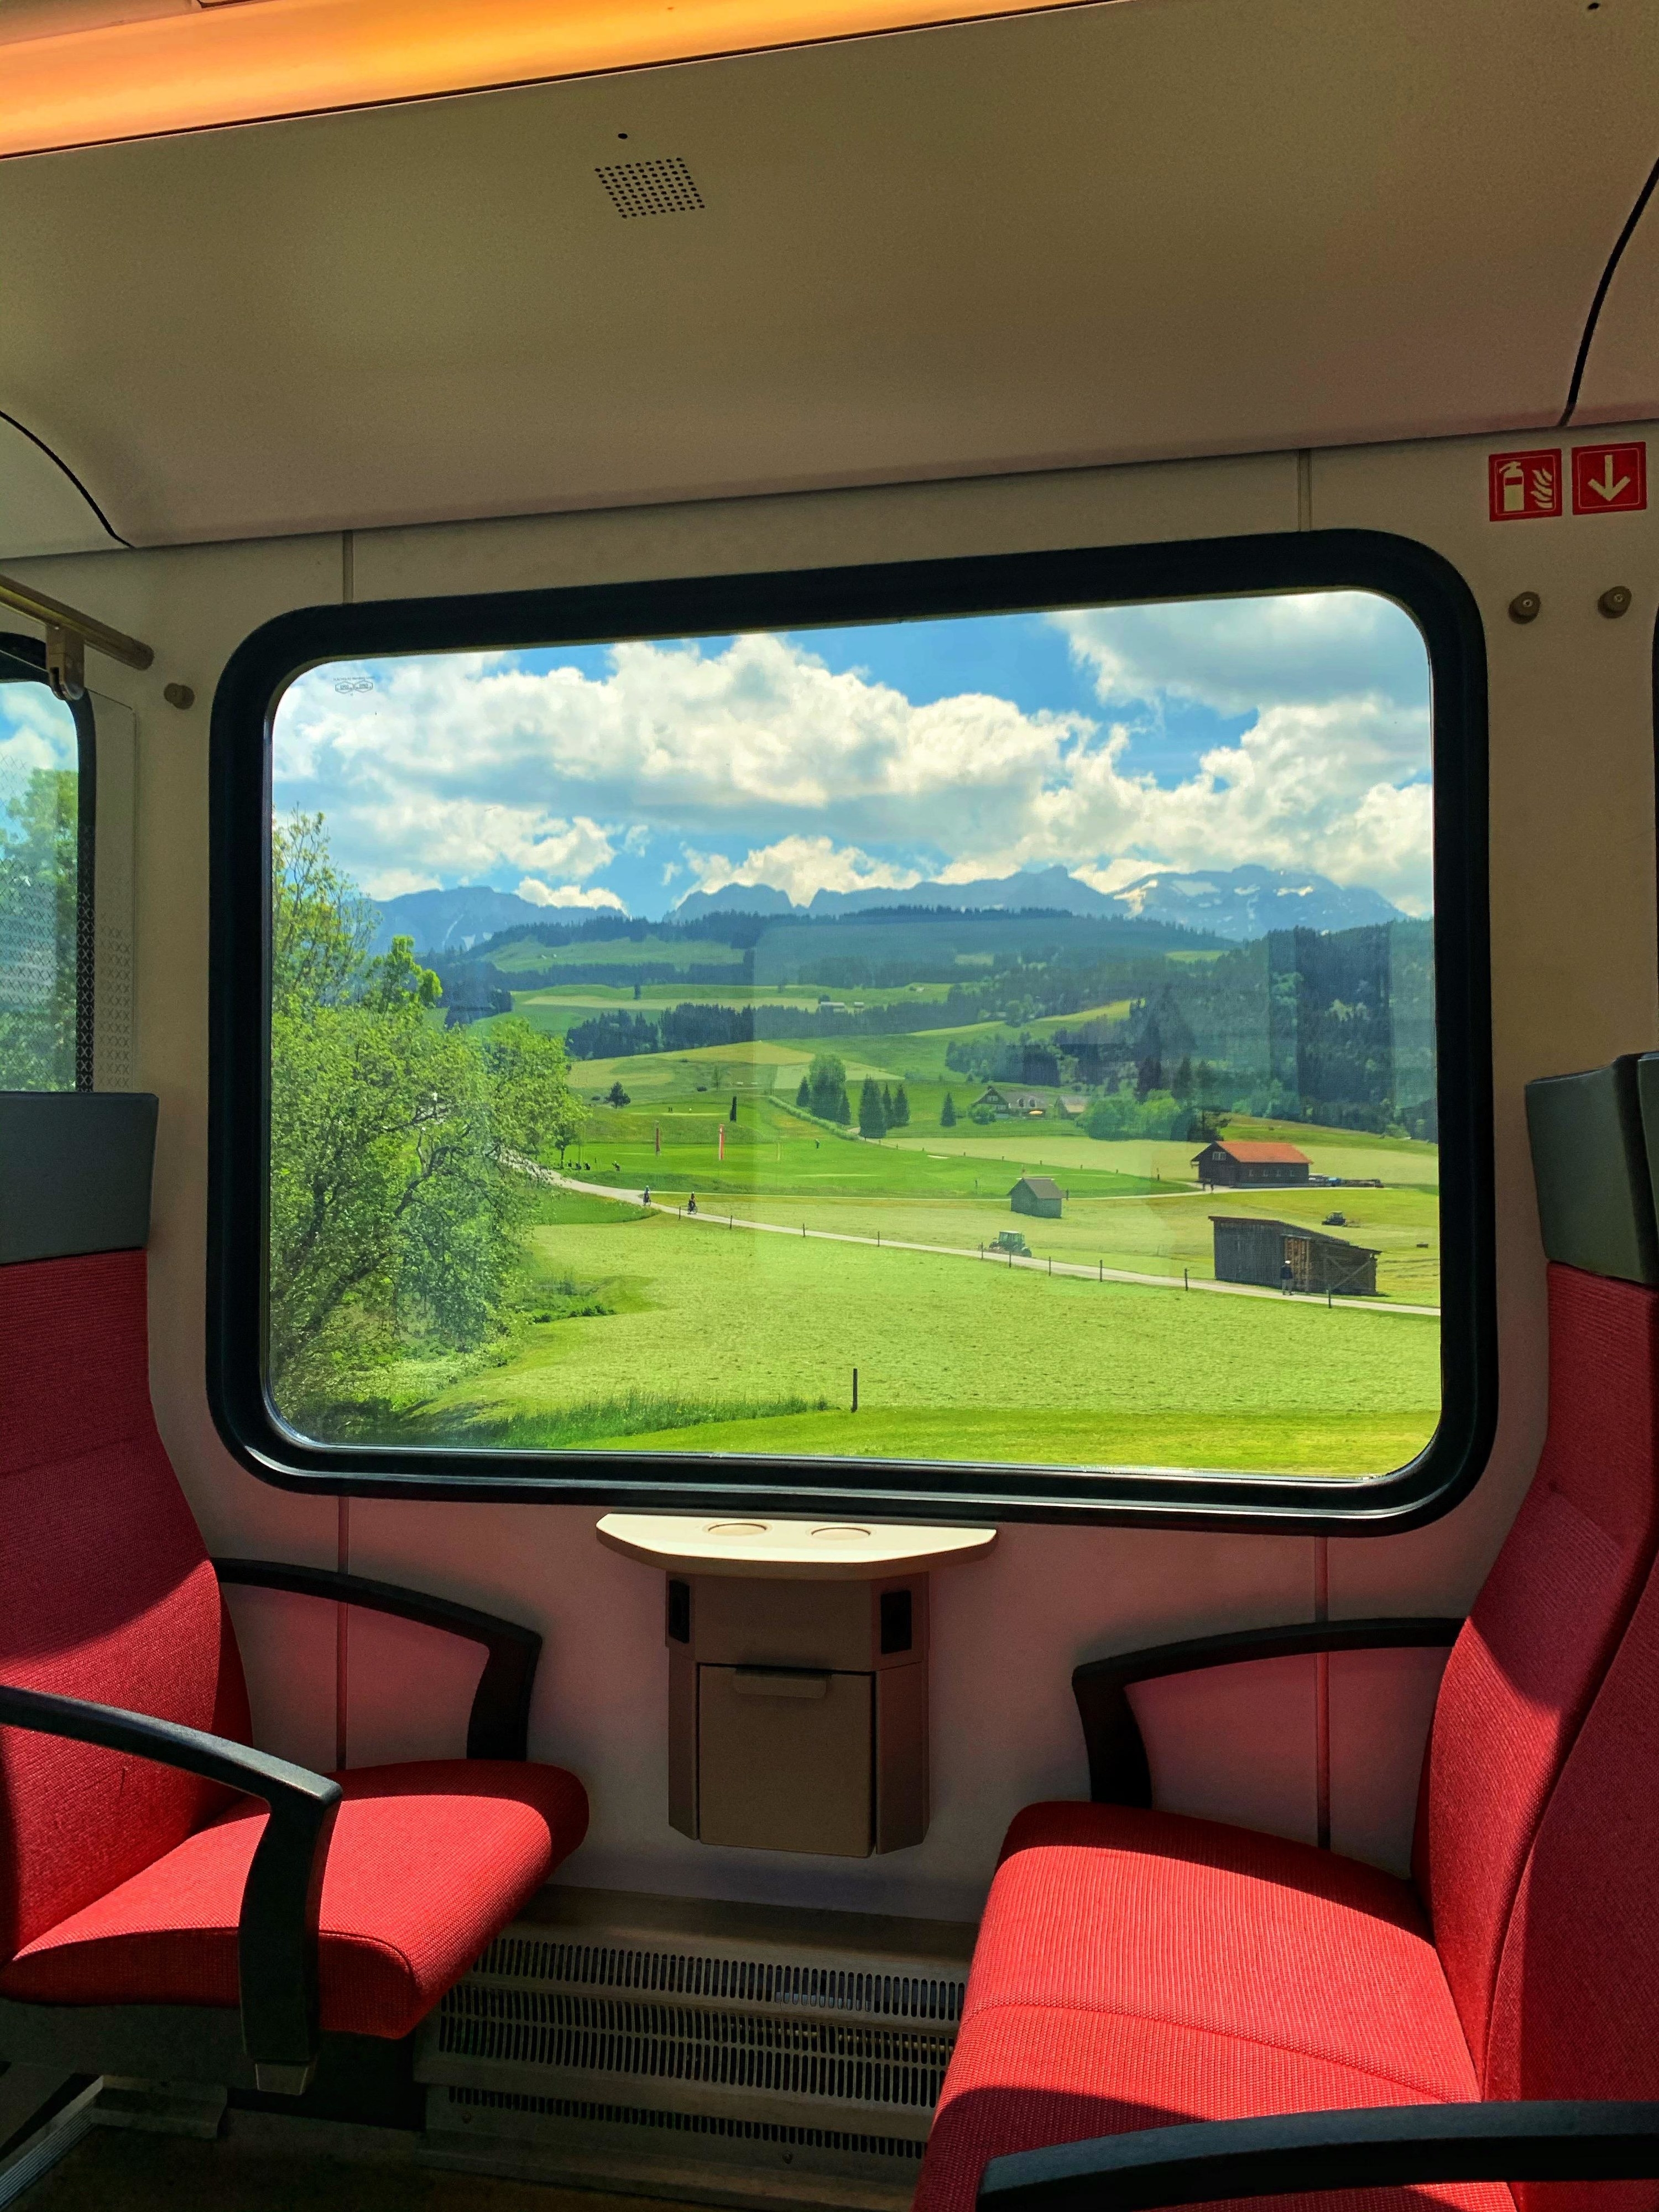 A view of a valley in Appenzell, Switzerland from a train window